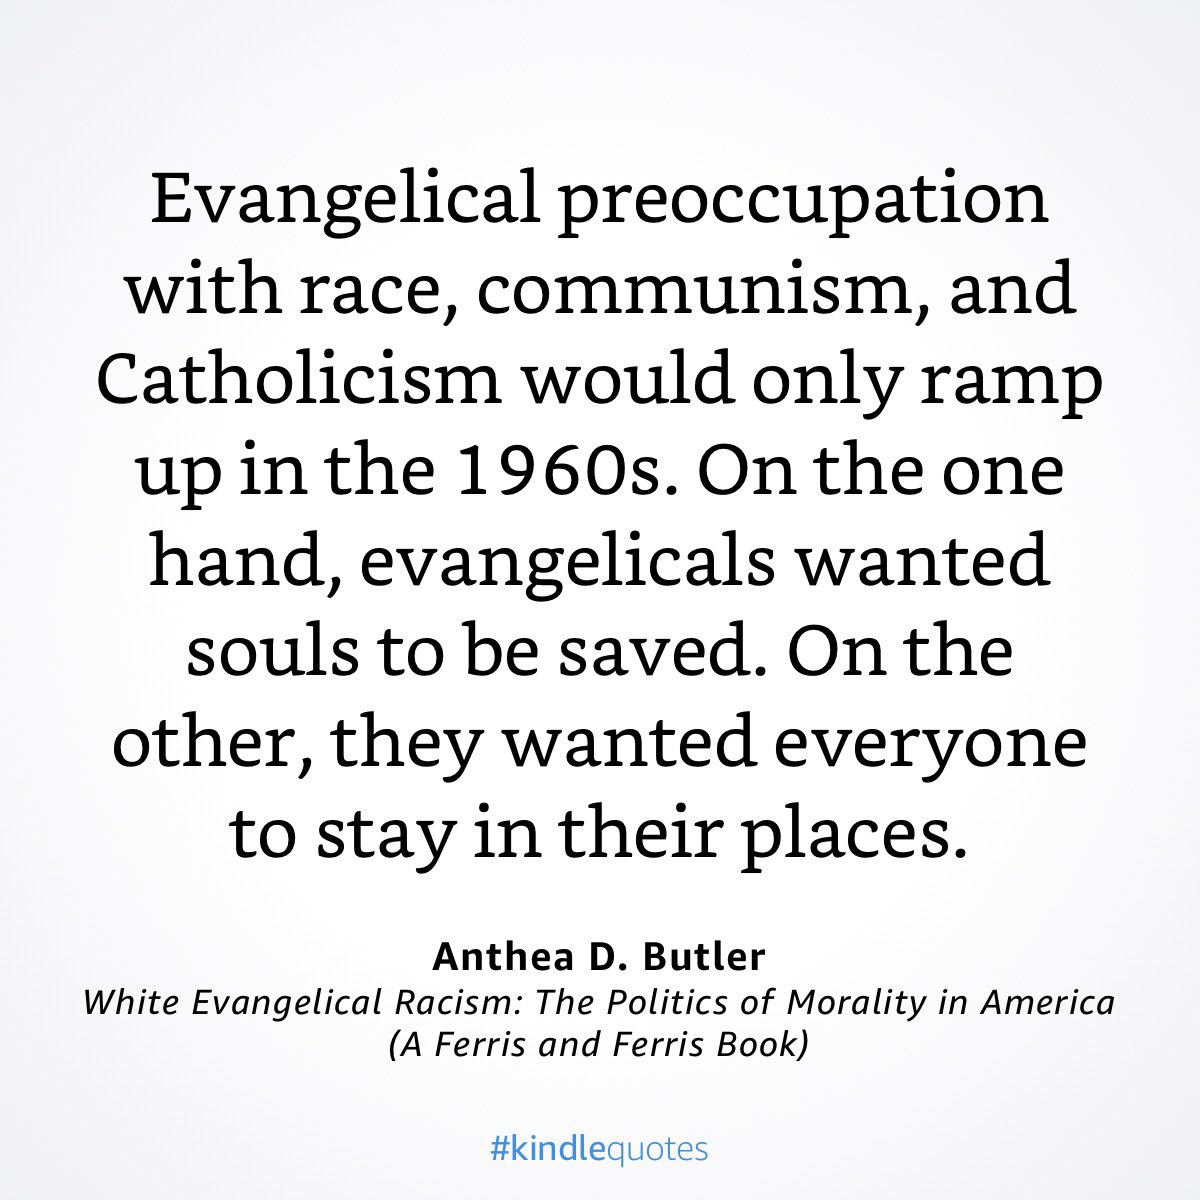 This is a fantastic way to summarize white American evangelicalism of the 20th century.